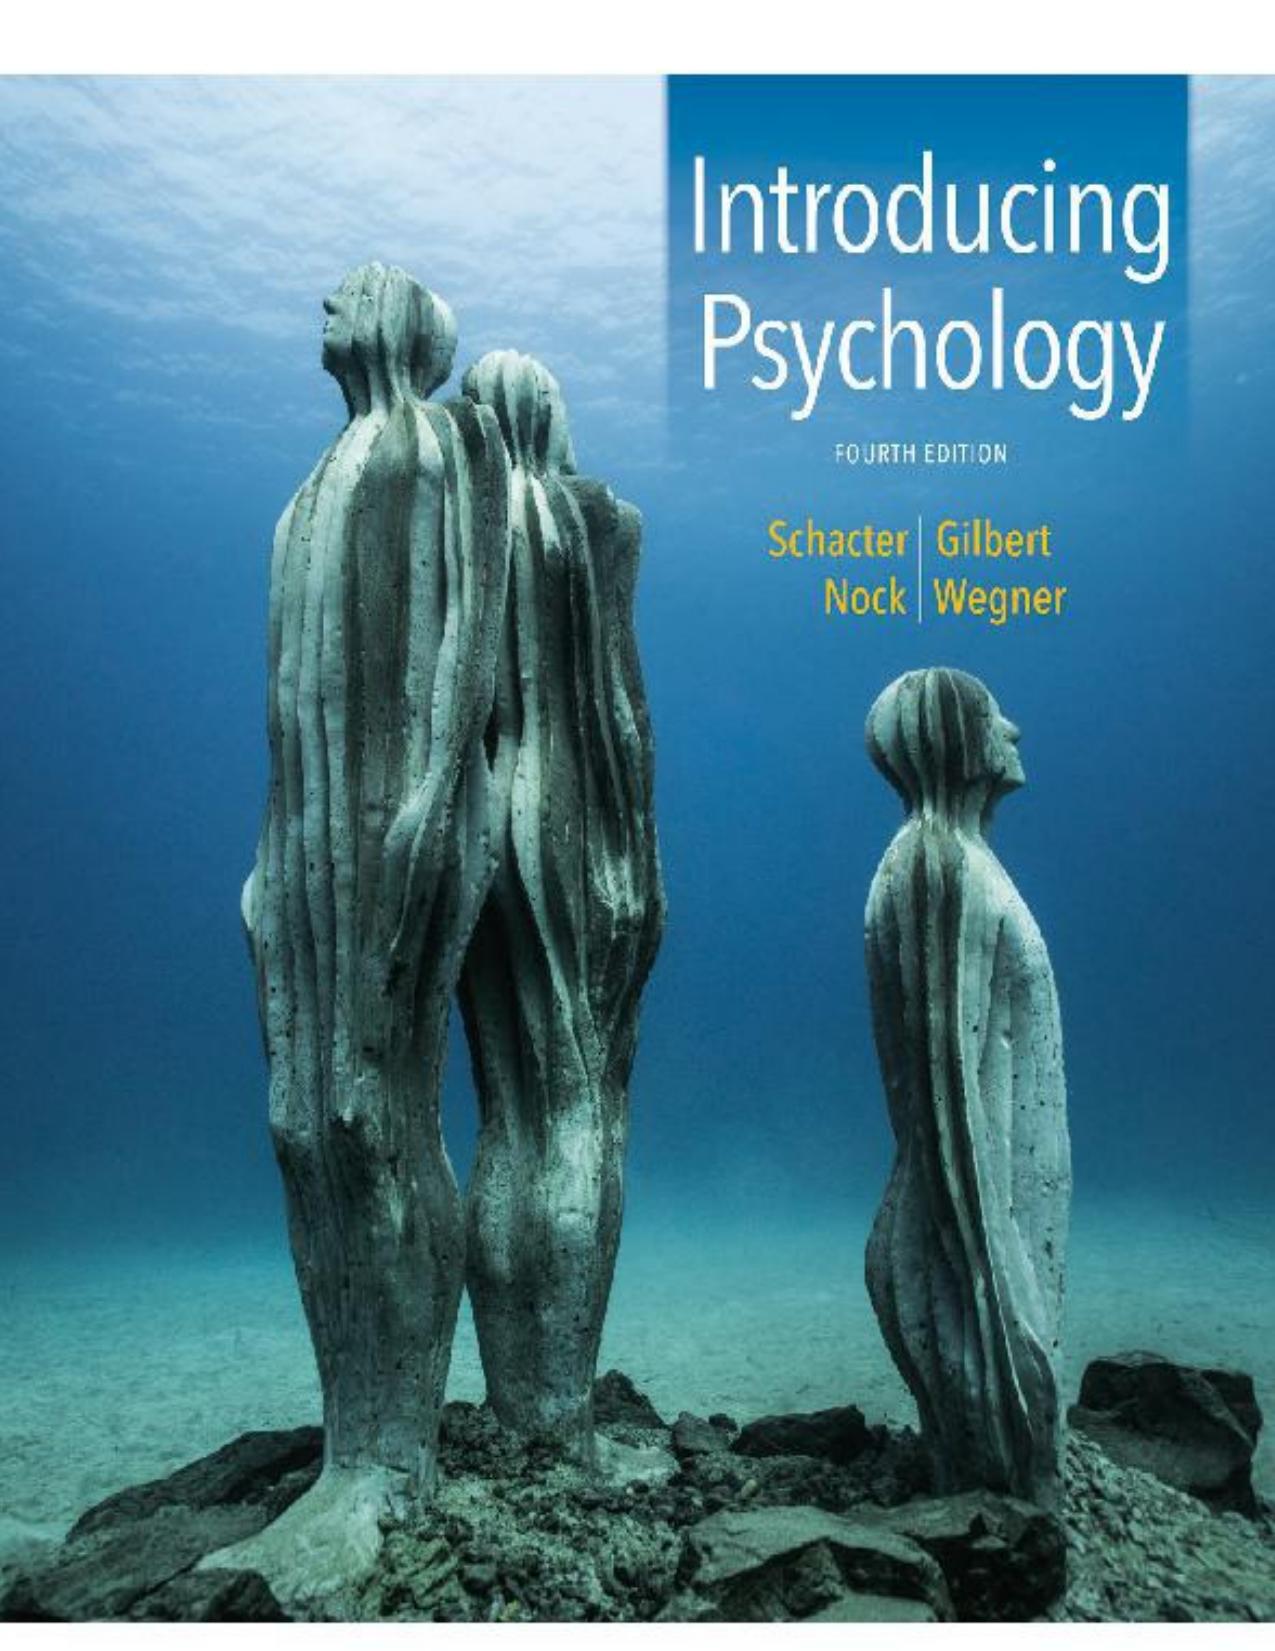 Test Bank for Introducing Psychology 4th by Daniel L. Schacter